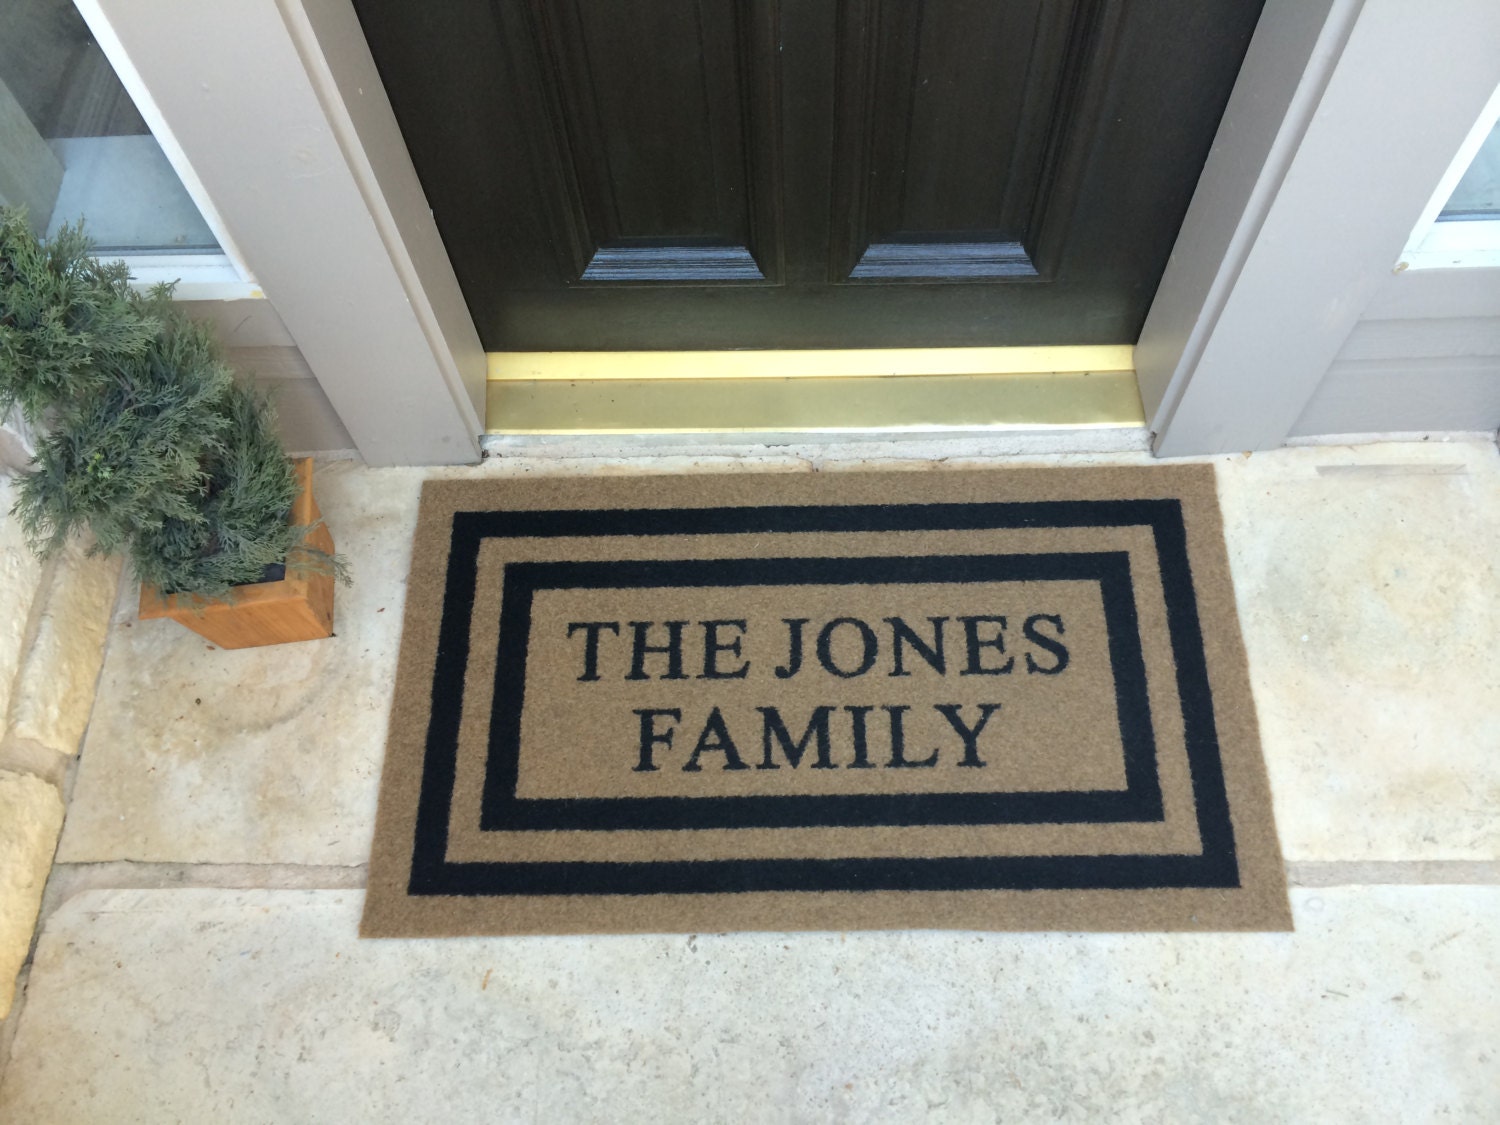 The Most Durable and Elegant Custom Door Mat Available. Infinity Custom Door Mats...The Door Mat You Can Keep Forever. Makes a perfect gift!